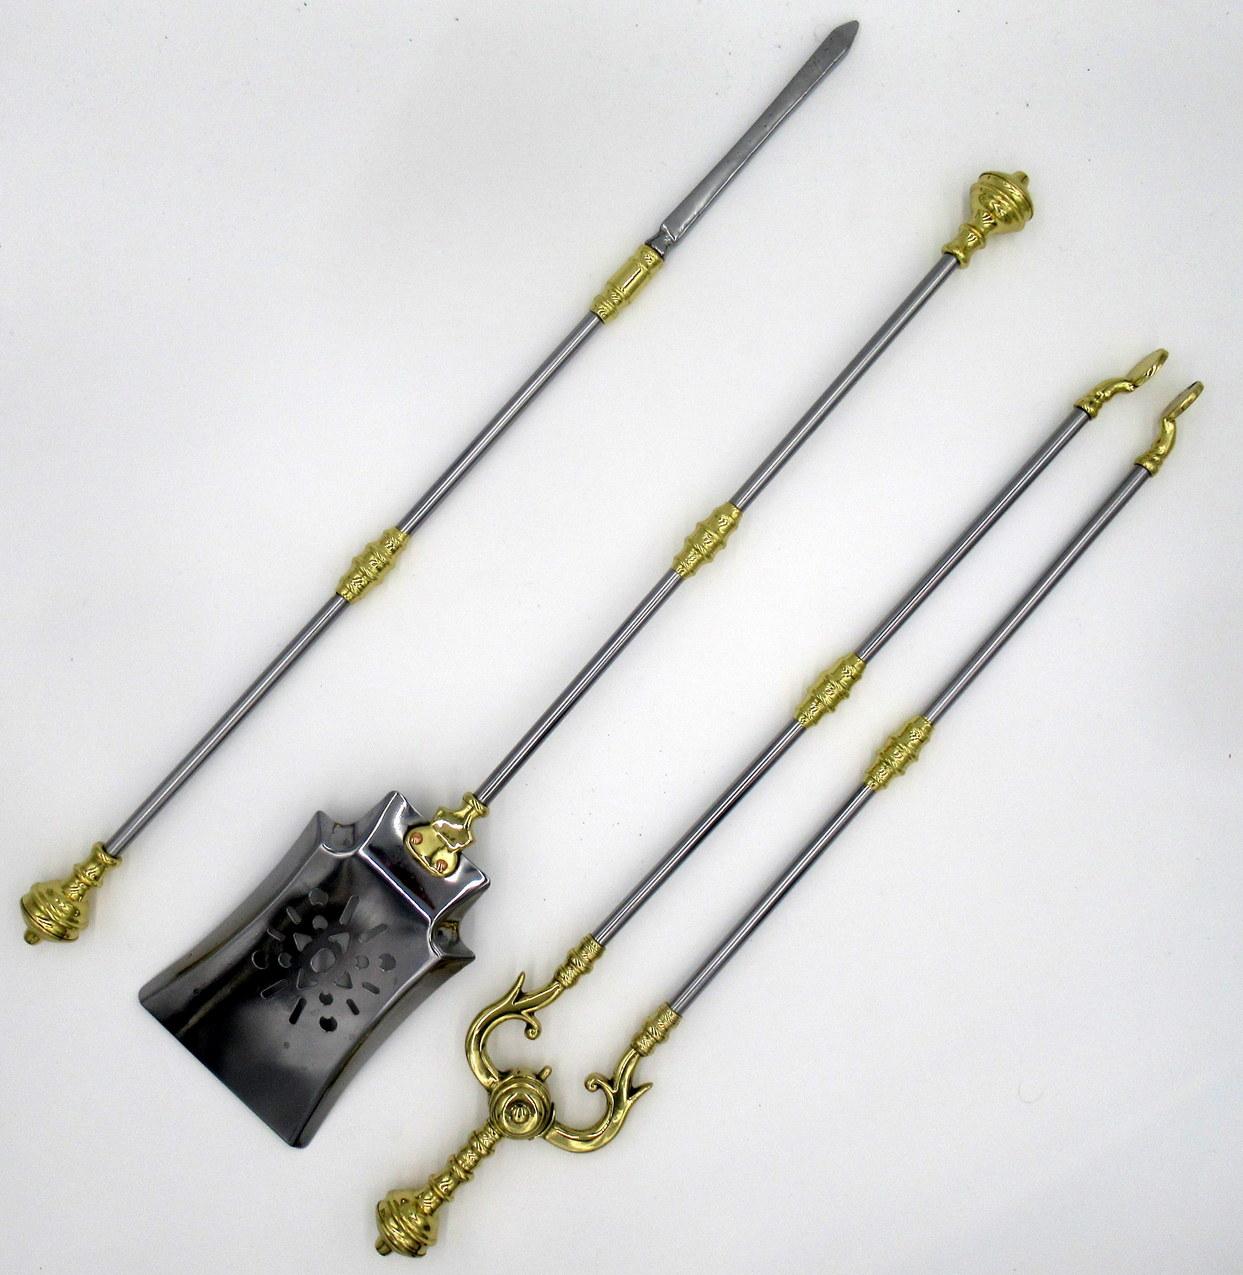 A very fine original set of early english victorian polished steel and brass fireplace fire tools of outstanding workmanship and quality. Mid Nineteenth Century. Circa 1860 

Comprising a poker, tongs and finely pierced flair tipped shovel all